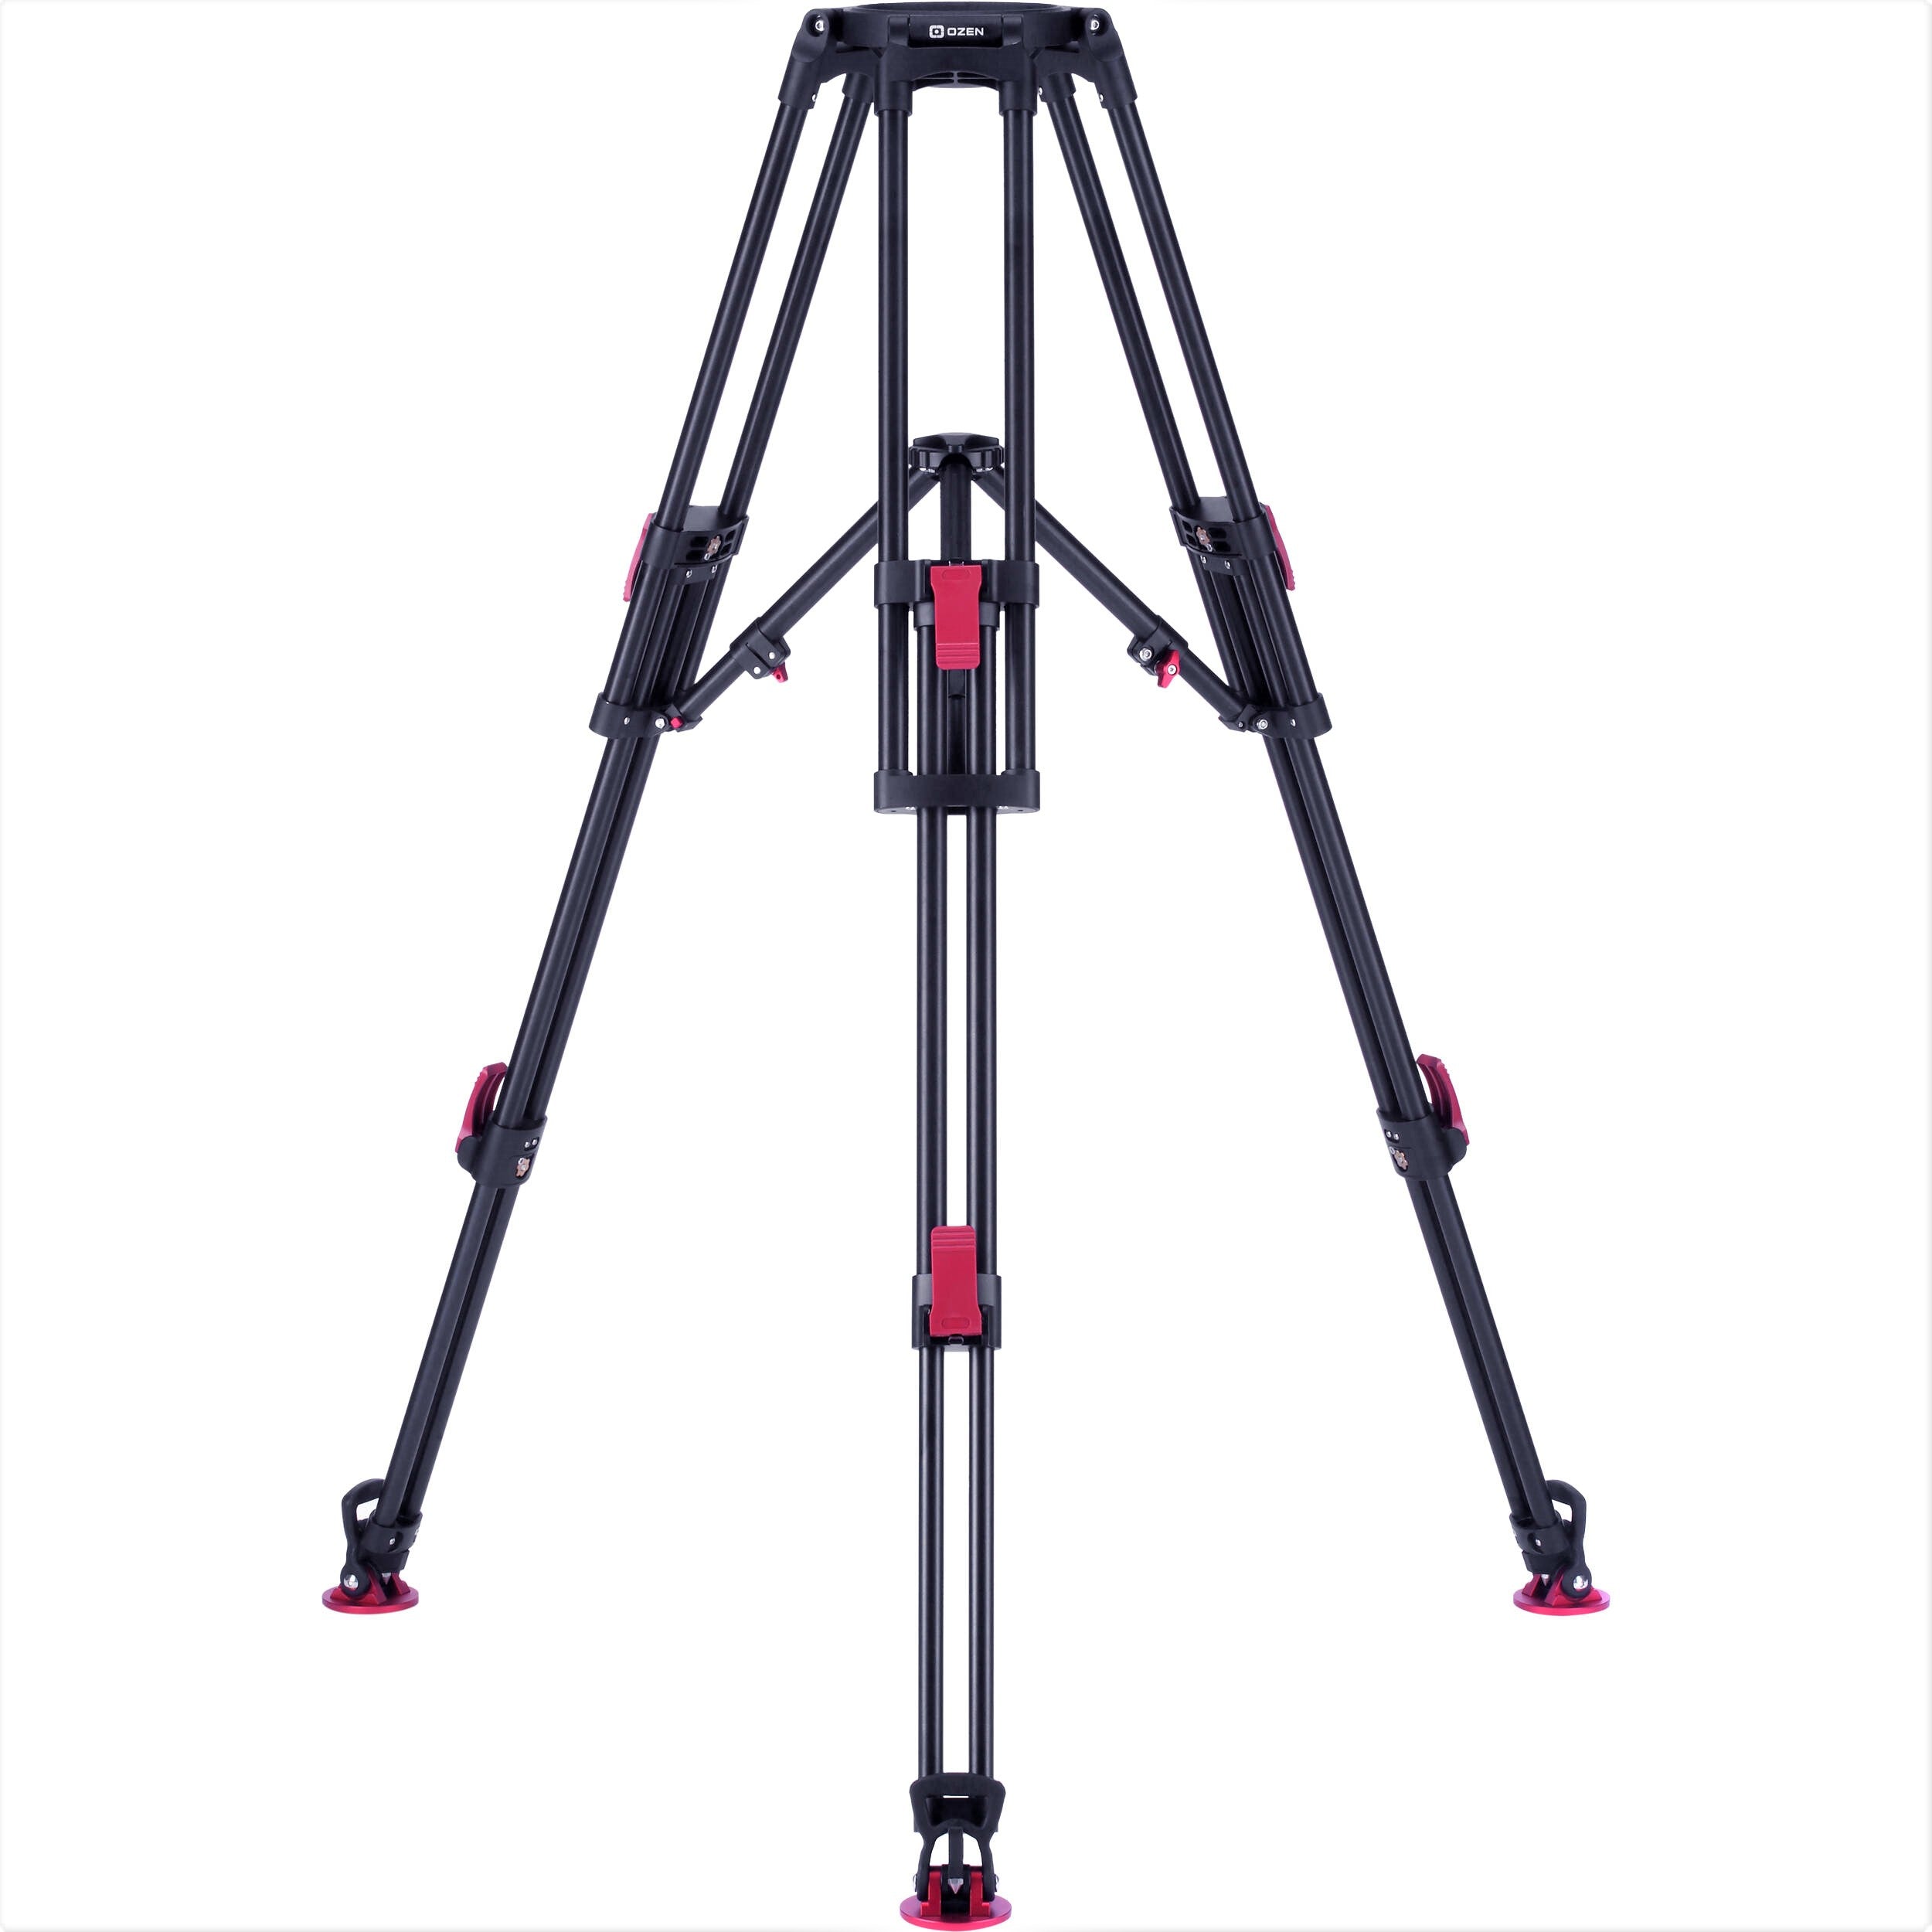 OZEN 2-Stage Heavy-Duty Carbon Fiber 150mm Tripod with Mid-Level Spreader & Rubber Feet